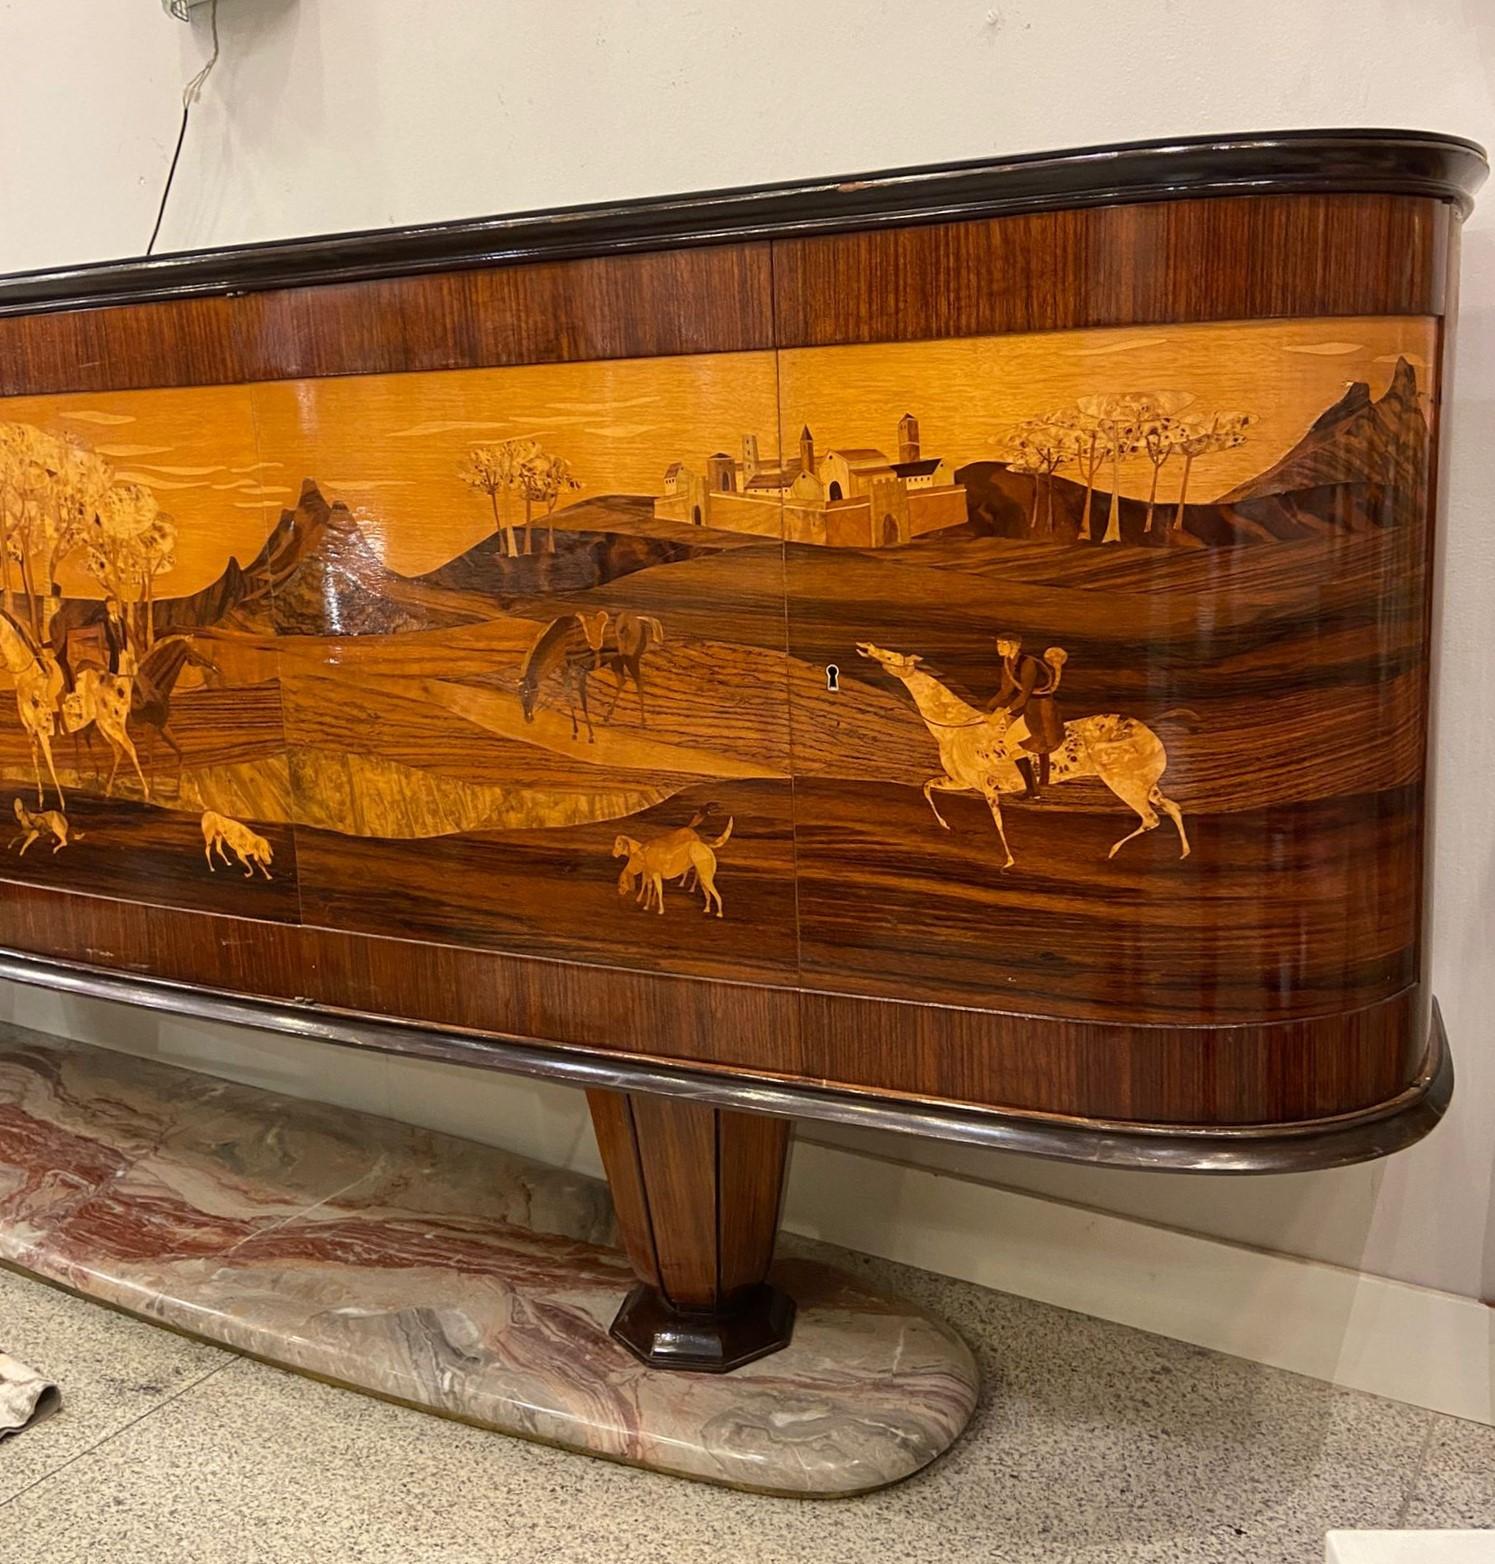 One of a kind enfilade or large sideboard with a horizontal structure made of wood, with wonderful inlay work, by the famous Italian designer Vittorio Dassi during the 1950s. It stands out for the use of different precious woods that give the piece